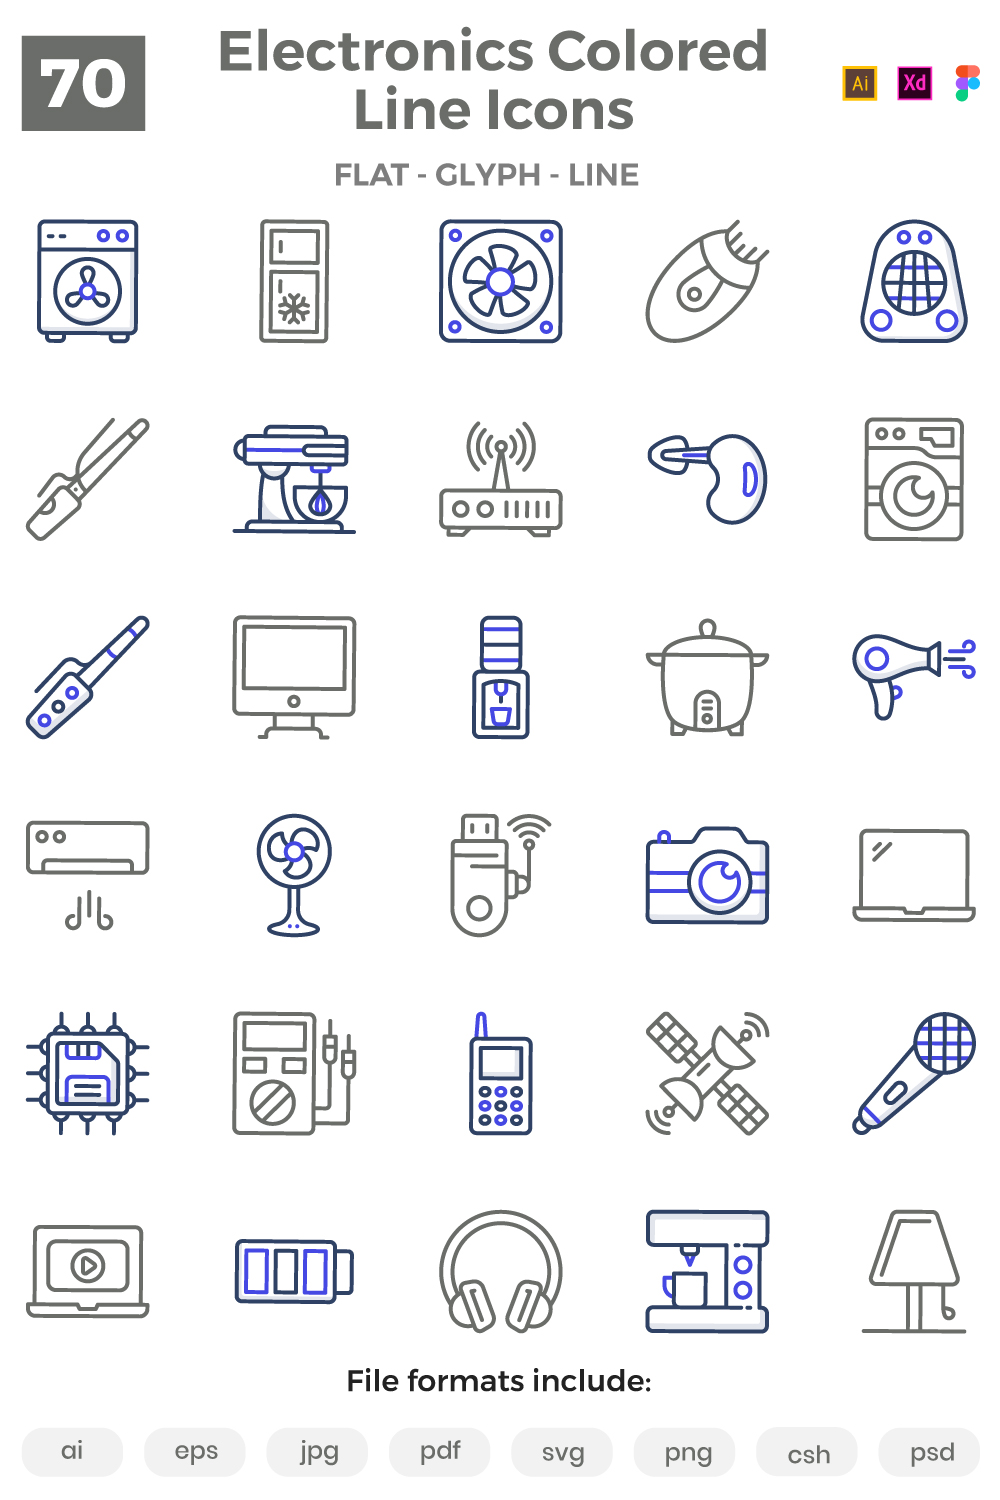 70 Appliance and Electronics Colored Line Icons pinterest preview image.